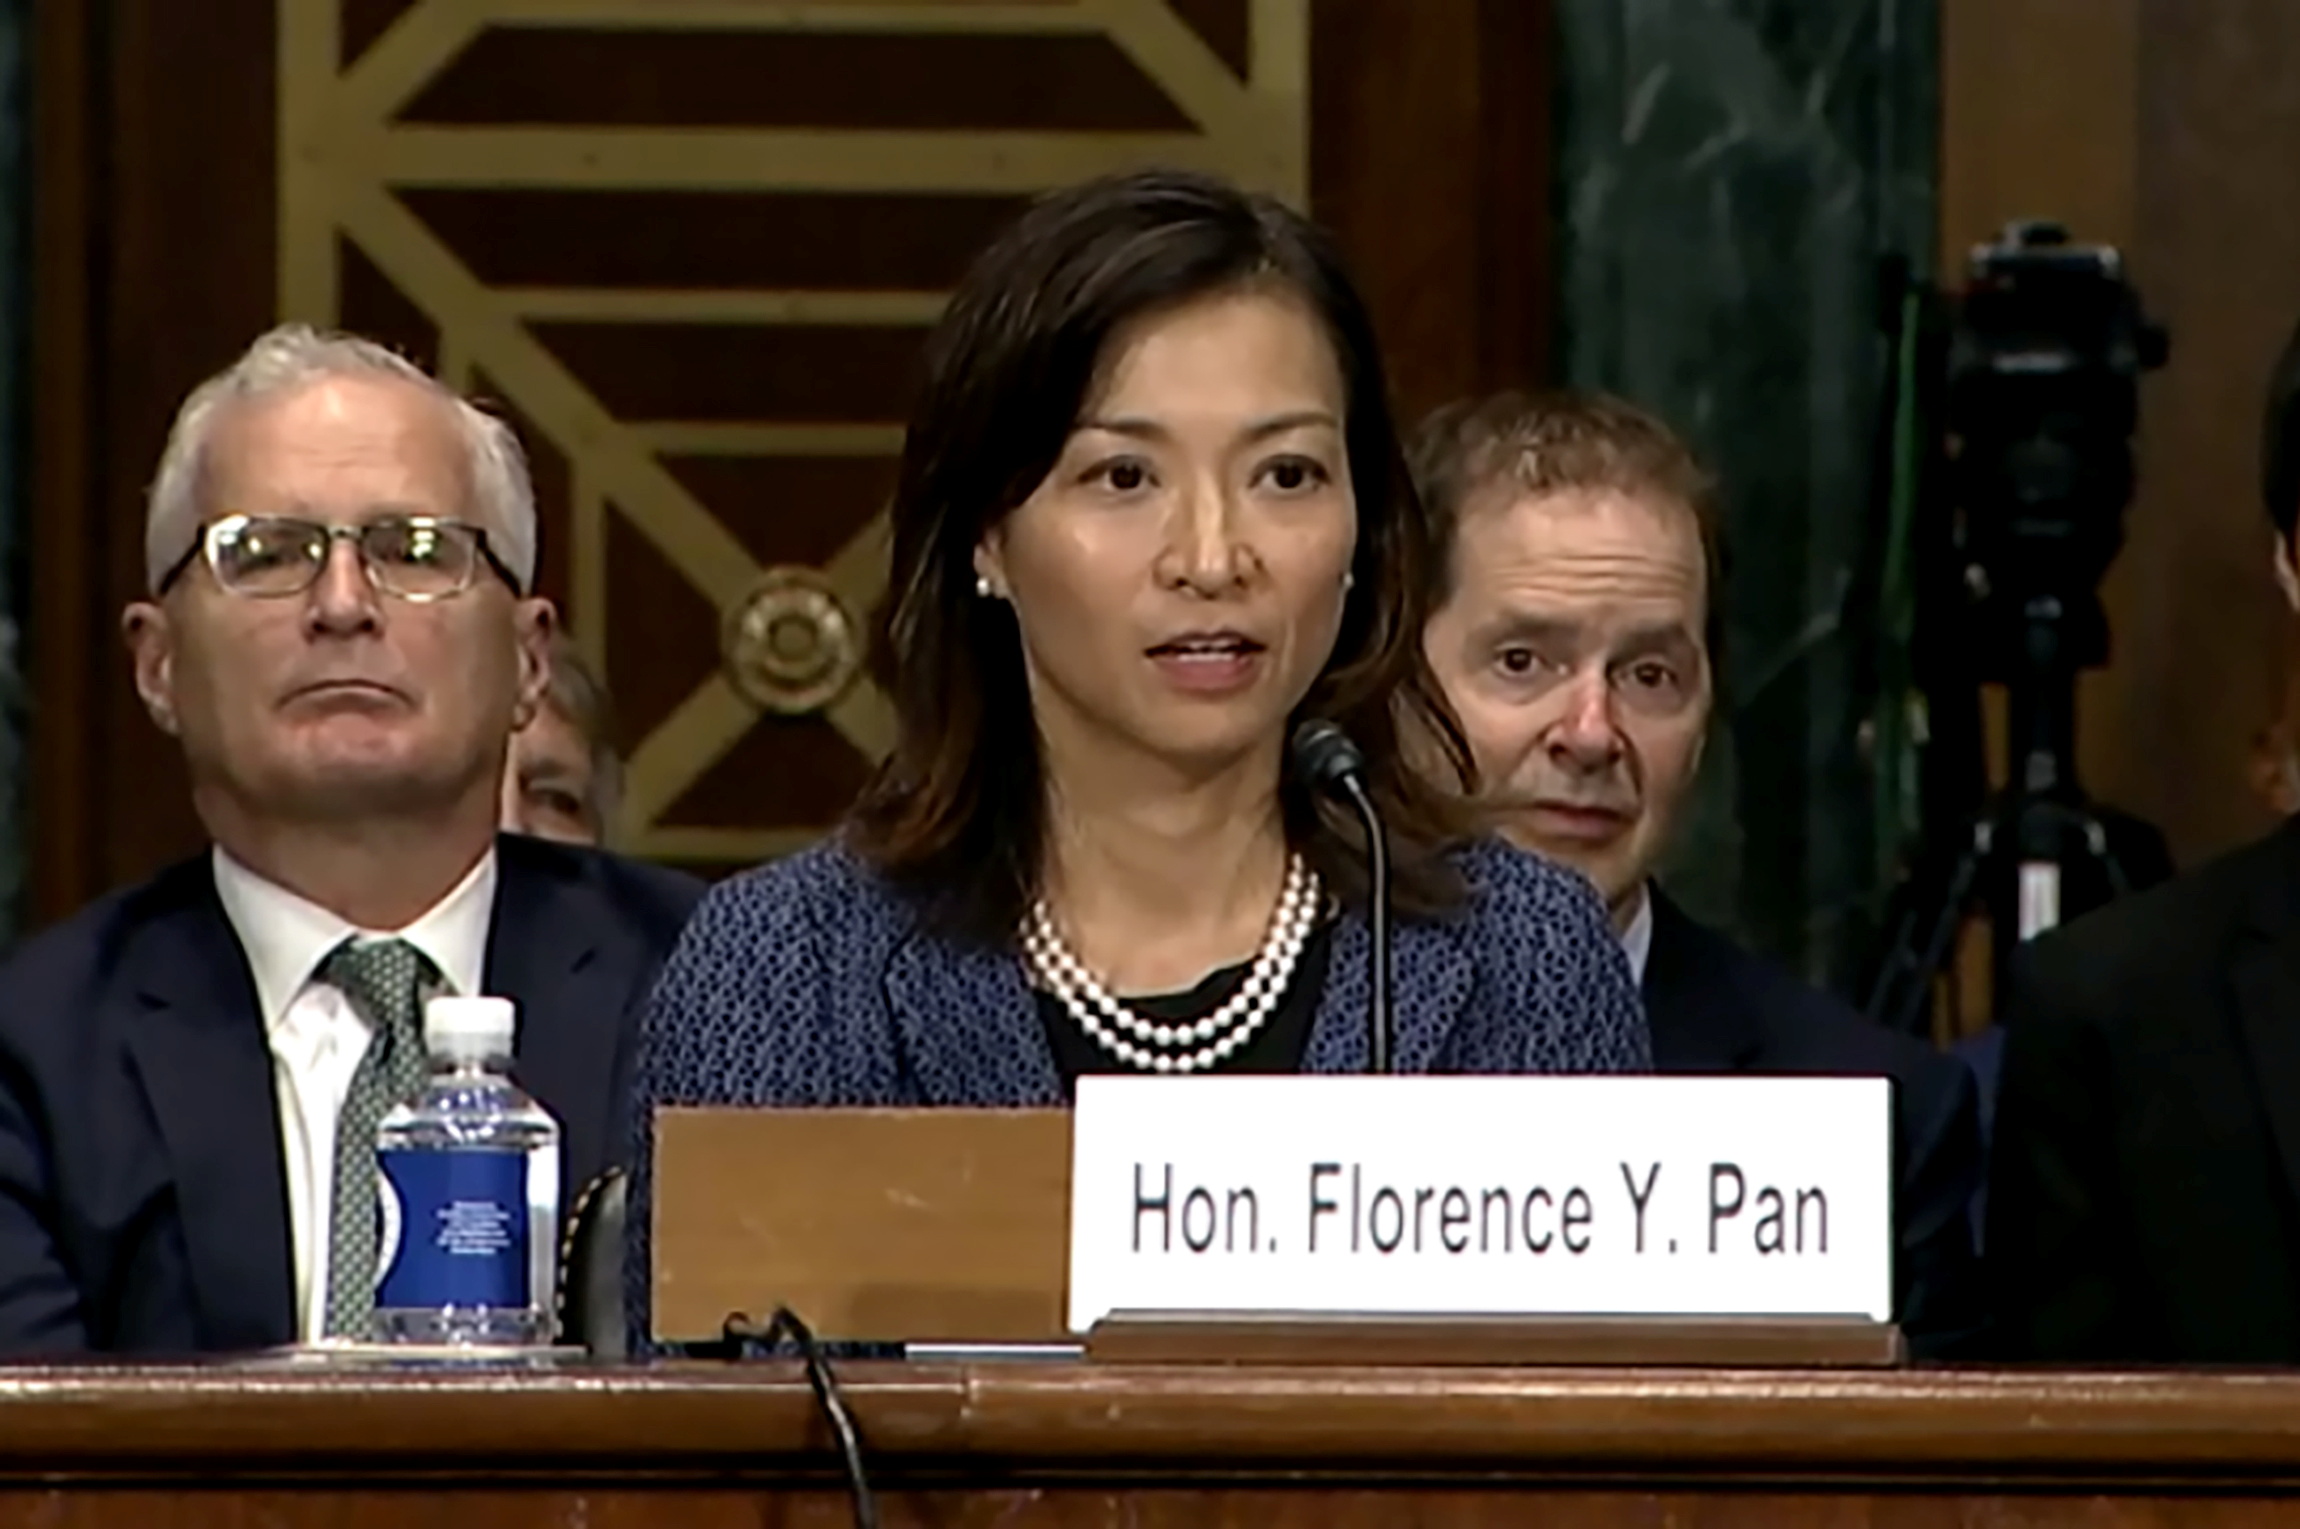 U.S. District Court nominee Pan testifies at Senate Judiciary Committee hearing on Capitol Hill in Washington